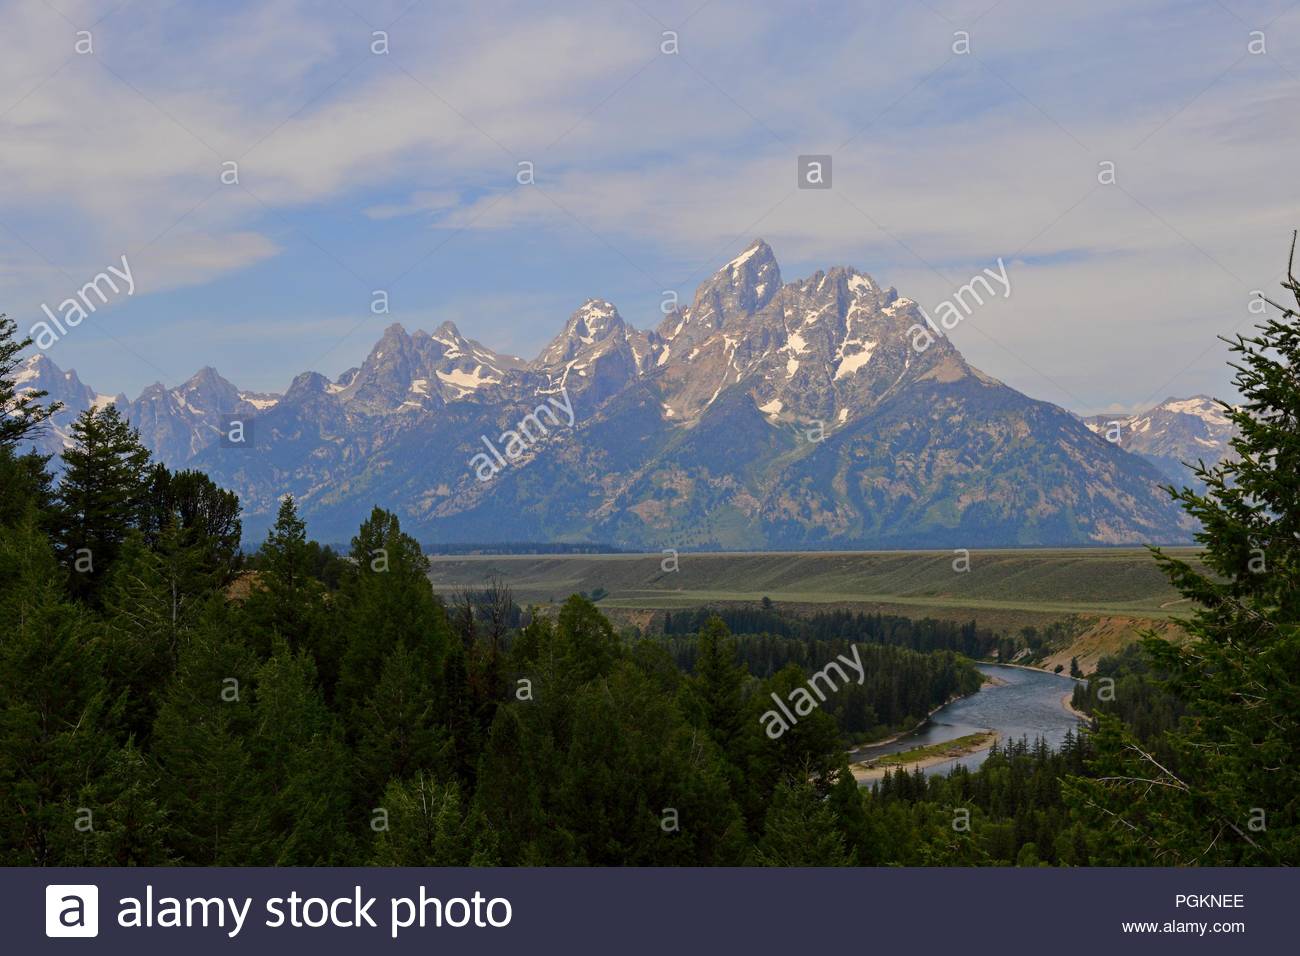 Snake River Overlook In Wyoming With The Grand Tetons